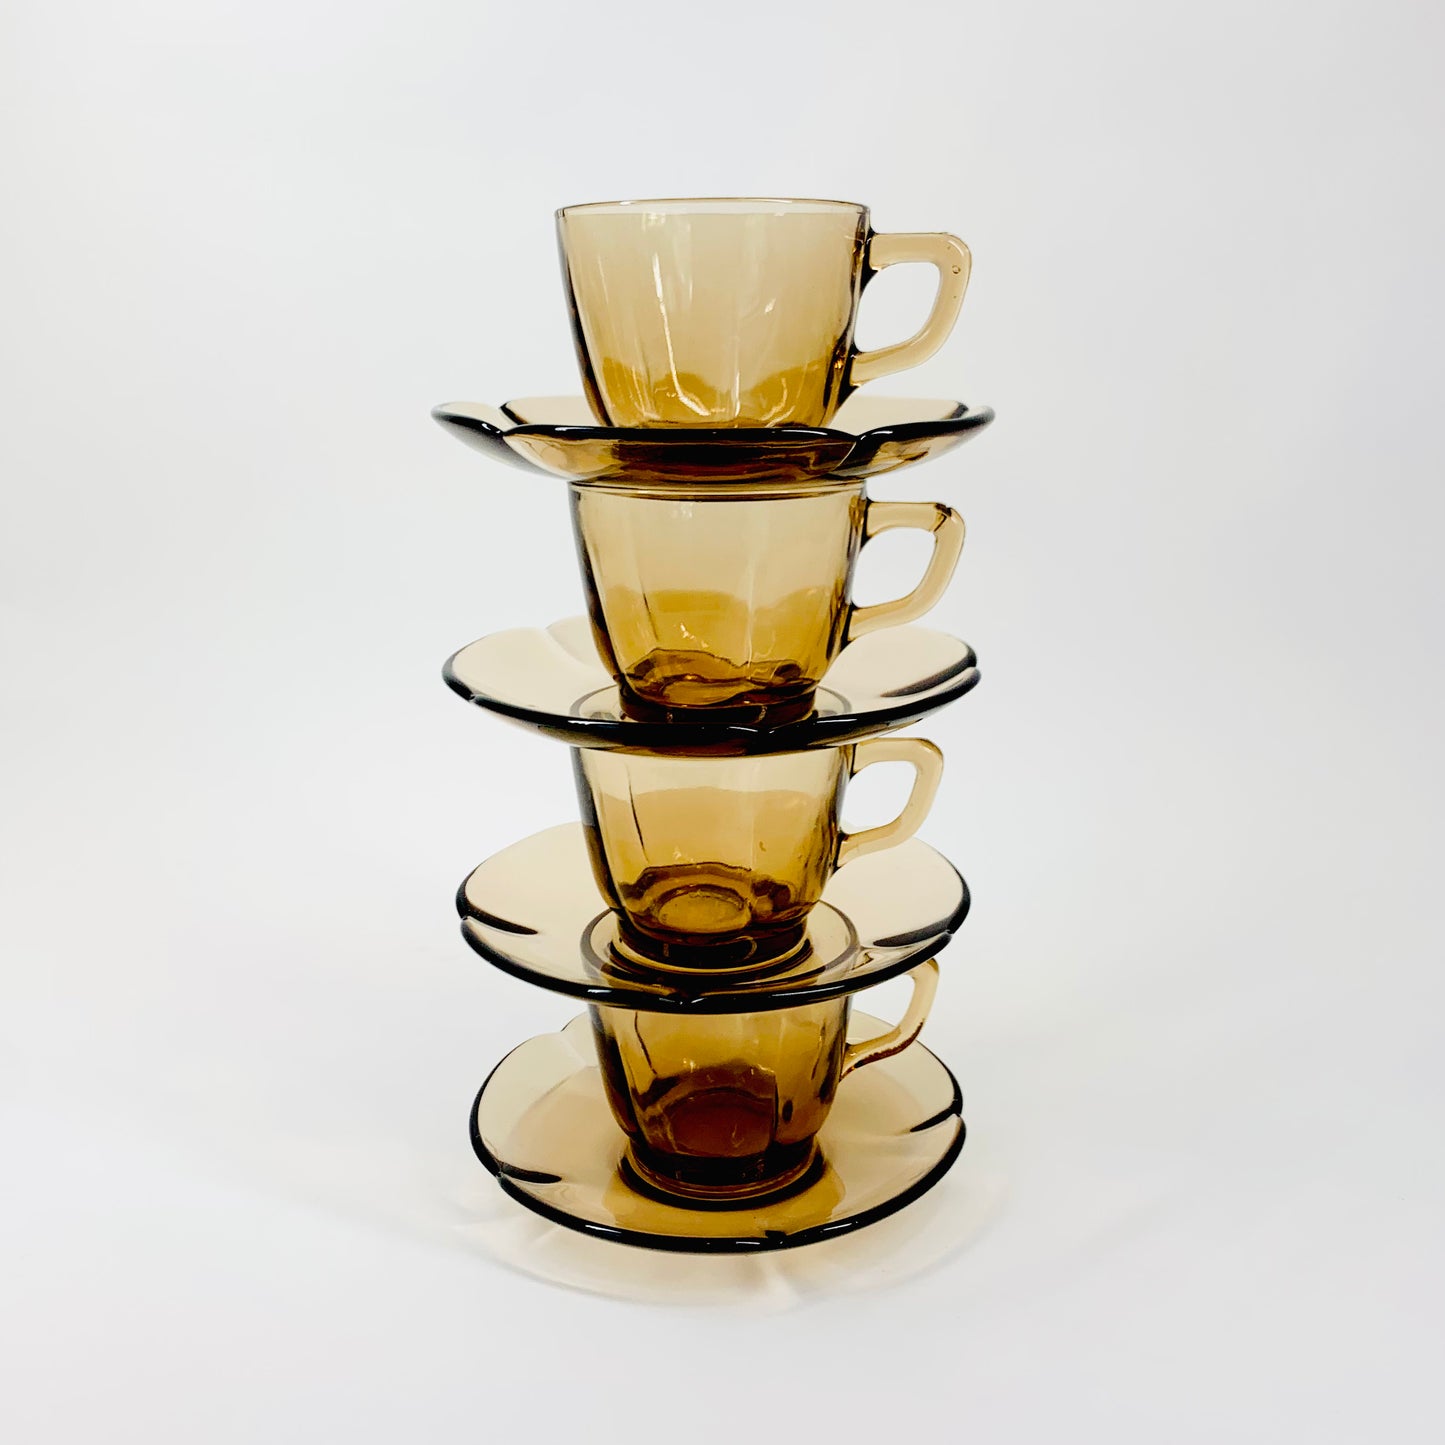 1970s brown Duralex glass espresso cup and matching saucer